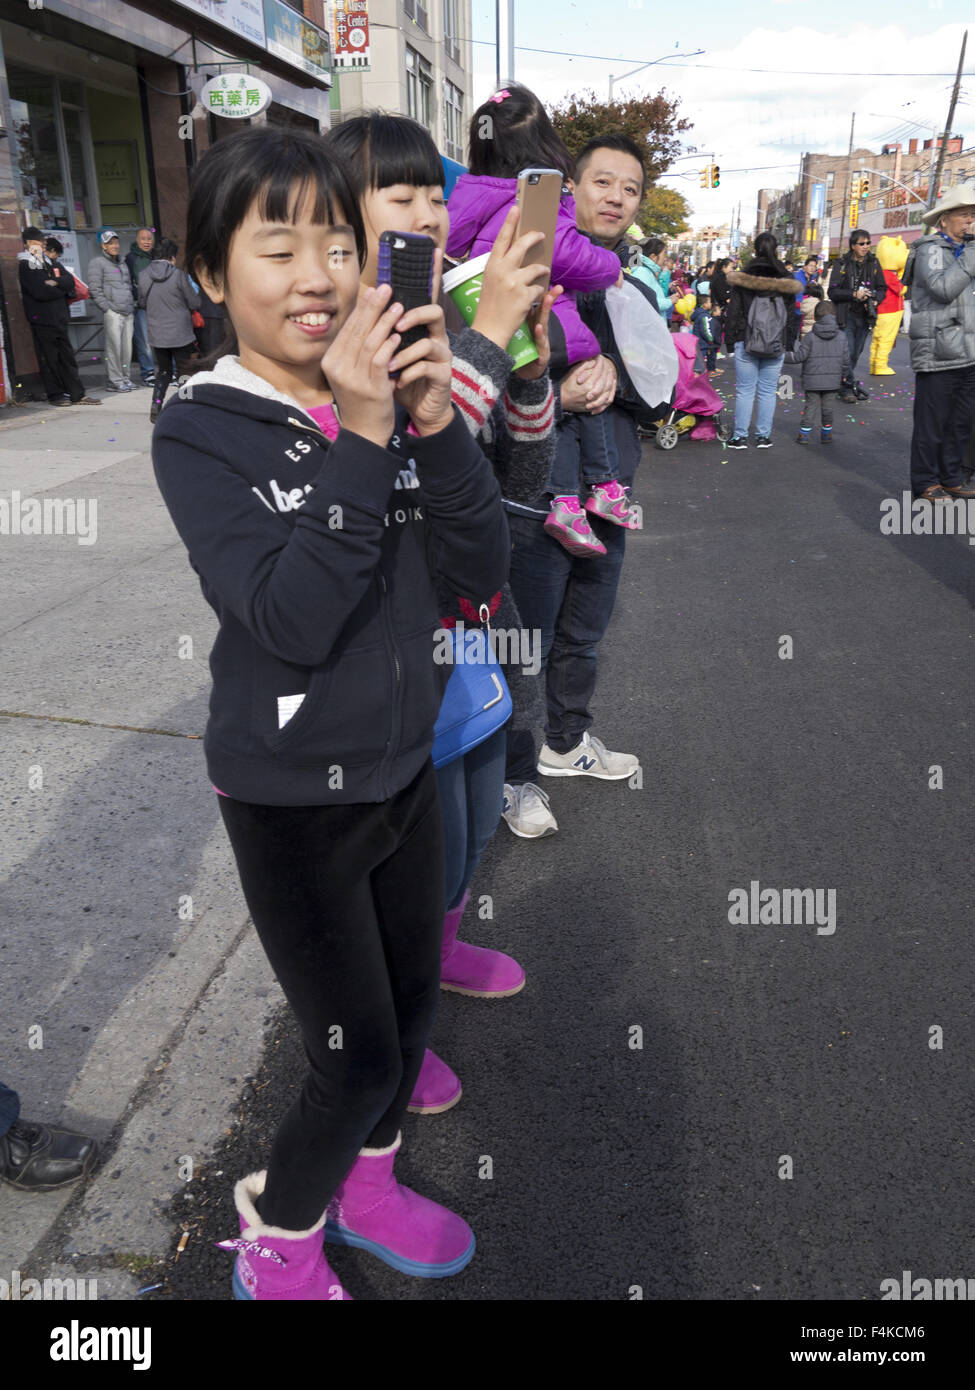 China-Tage-Festival und Laterne Parade in "Kleine Chinatown" in Sunset Park in Brooklyn, NY, Oct.18, 2015. Stockfoto